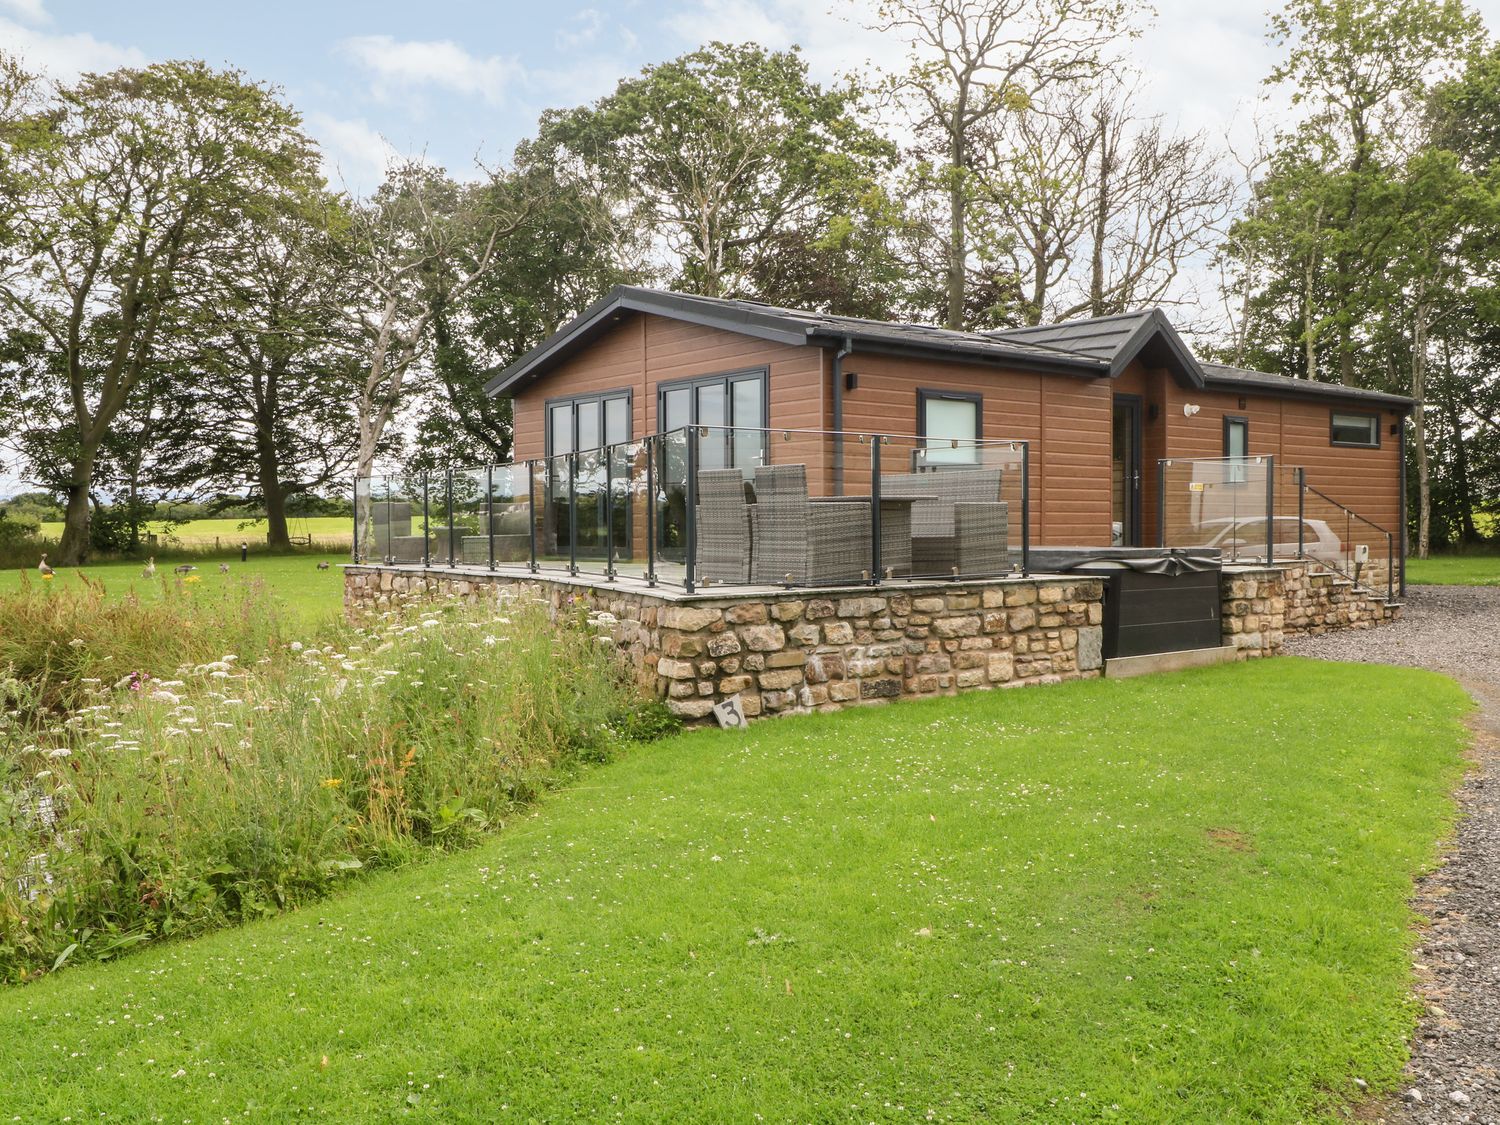 Retreat By The Bowers - Lake District - 1084443 - photo 1